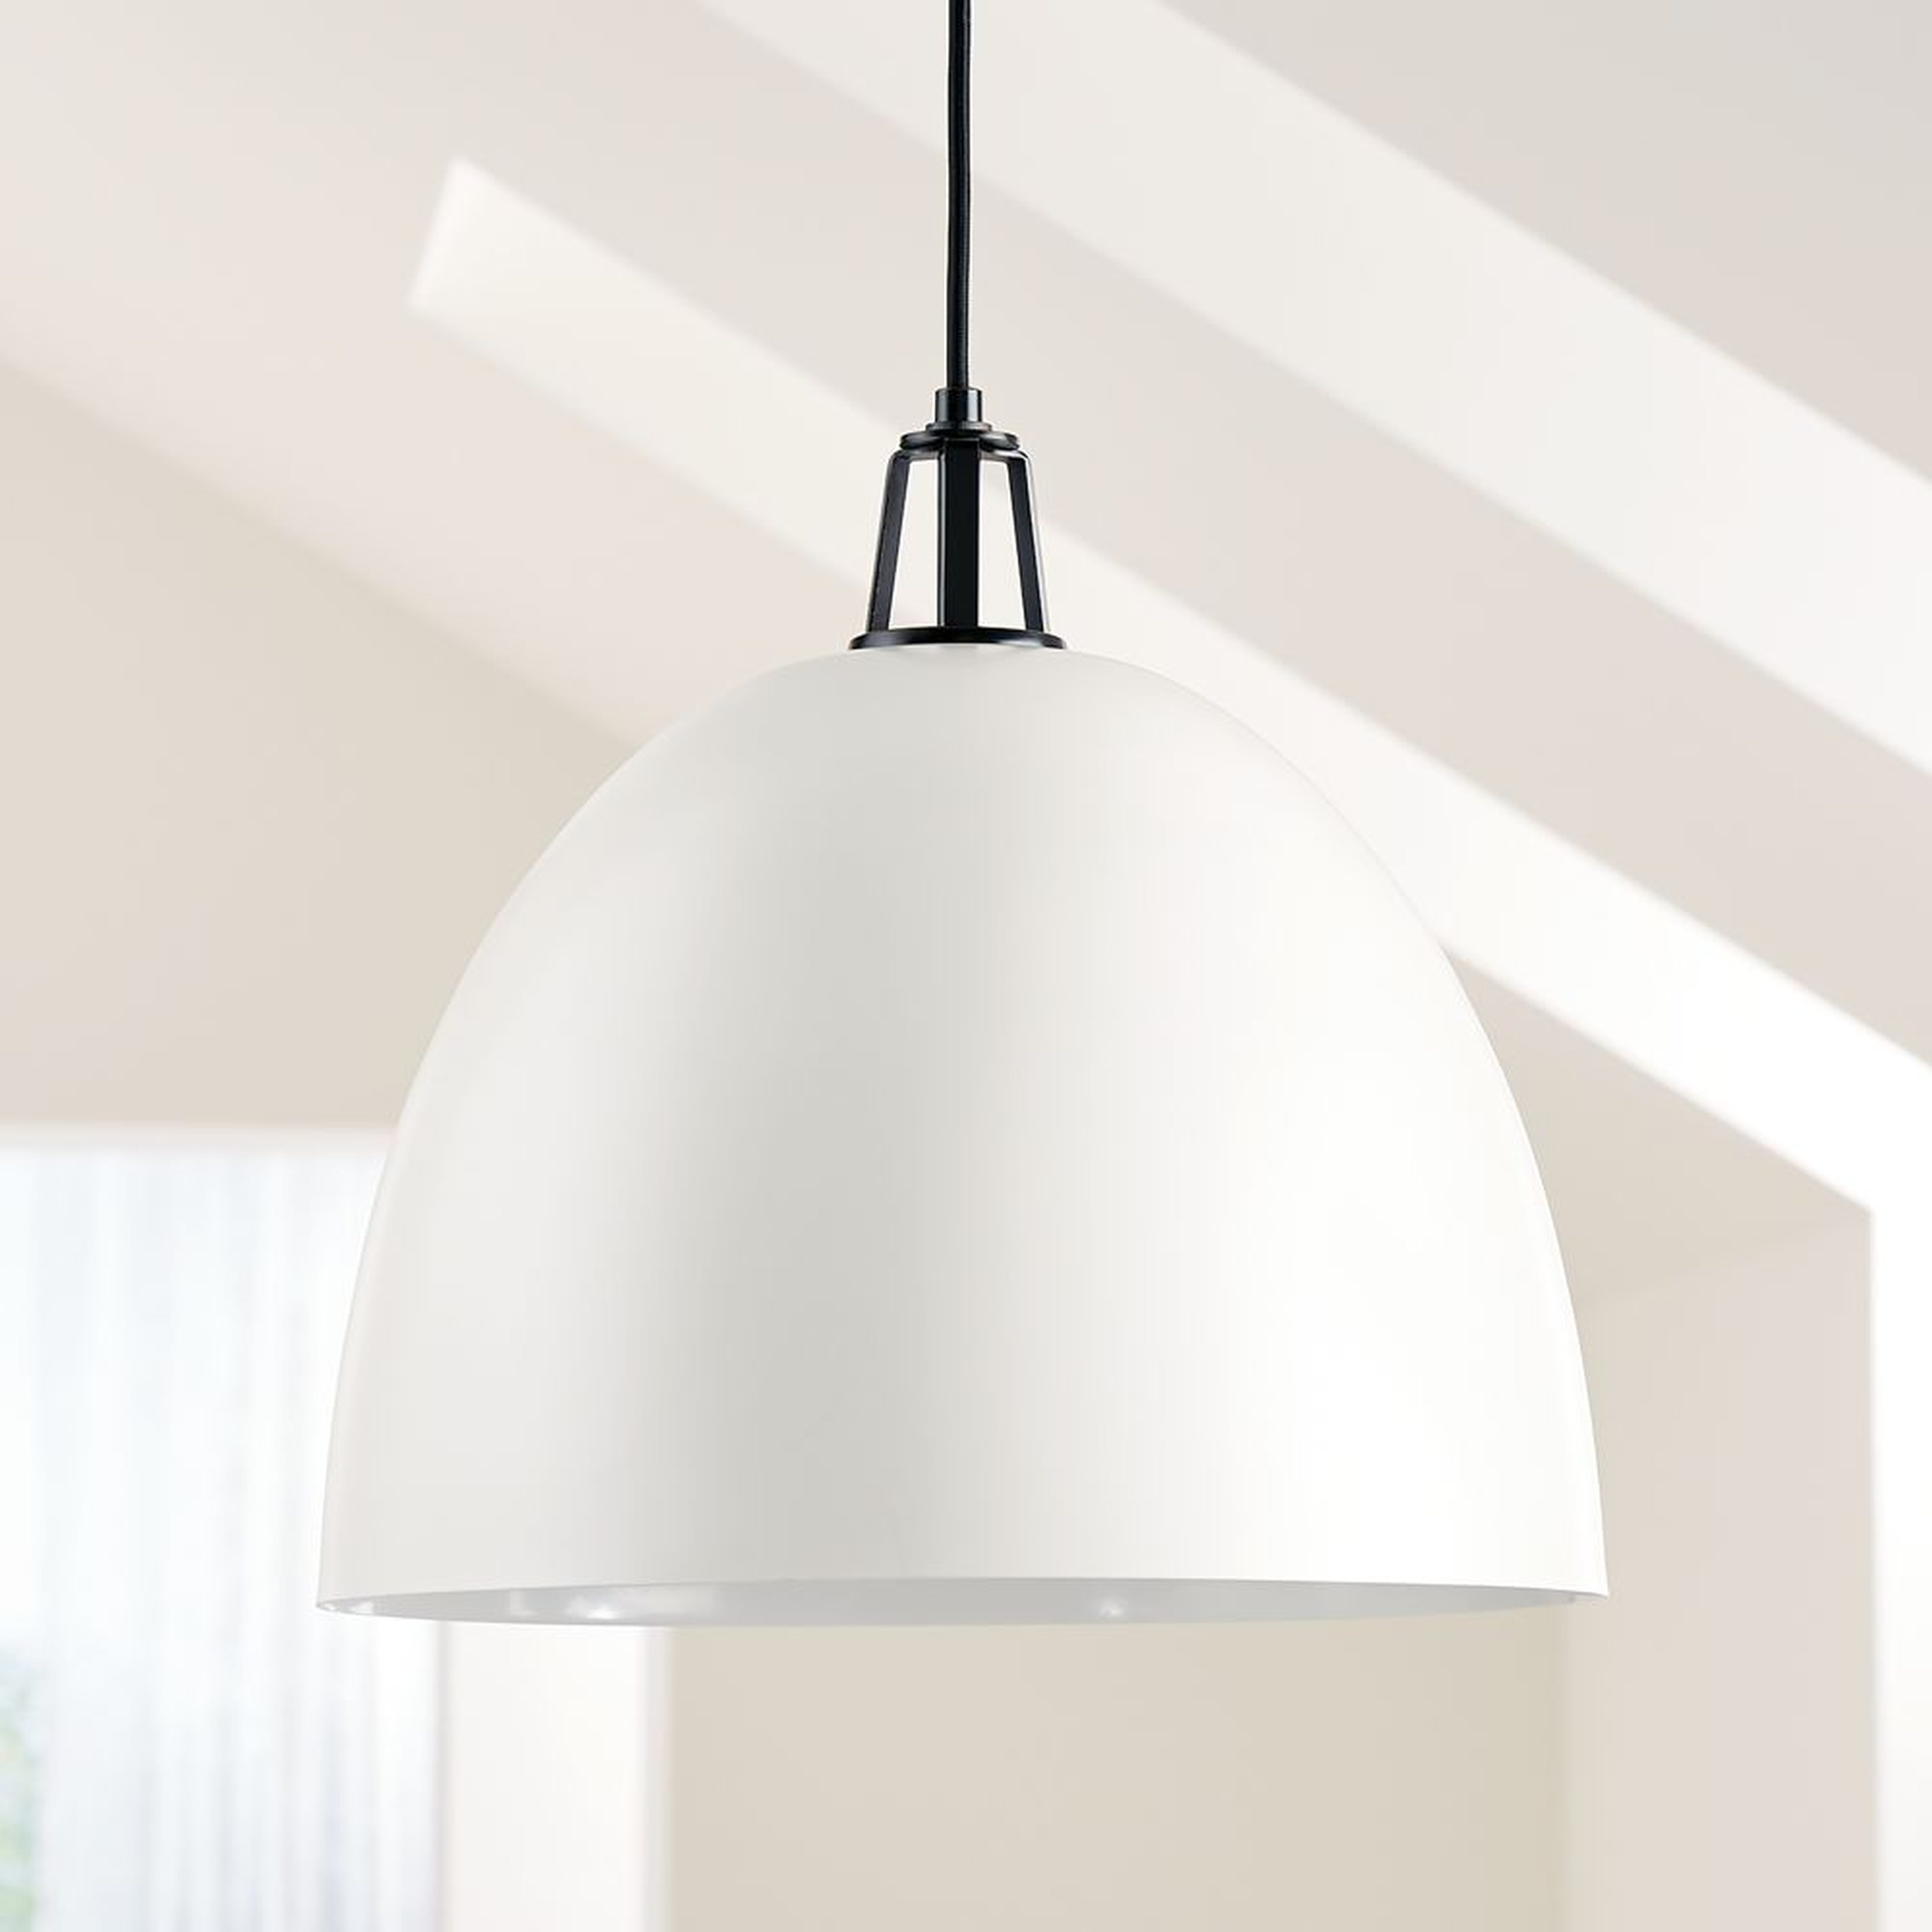 Maddox White Dome Large Pendant Light with Black Socket - Crate and Barrel